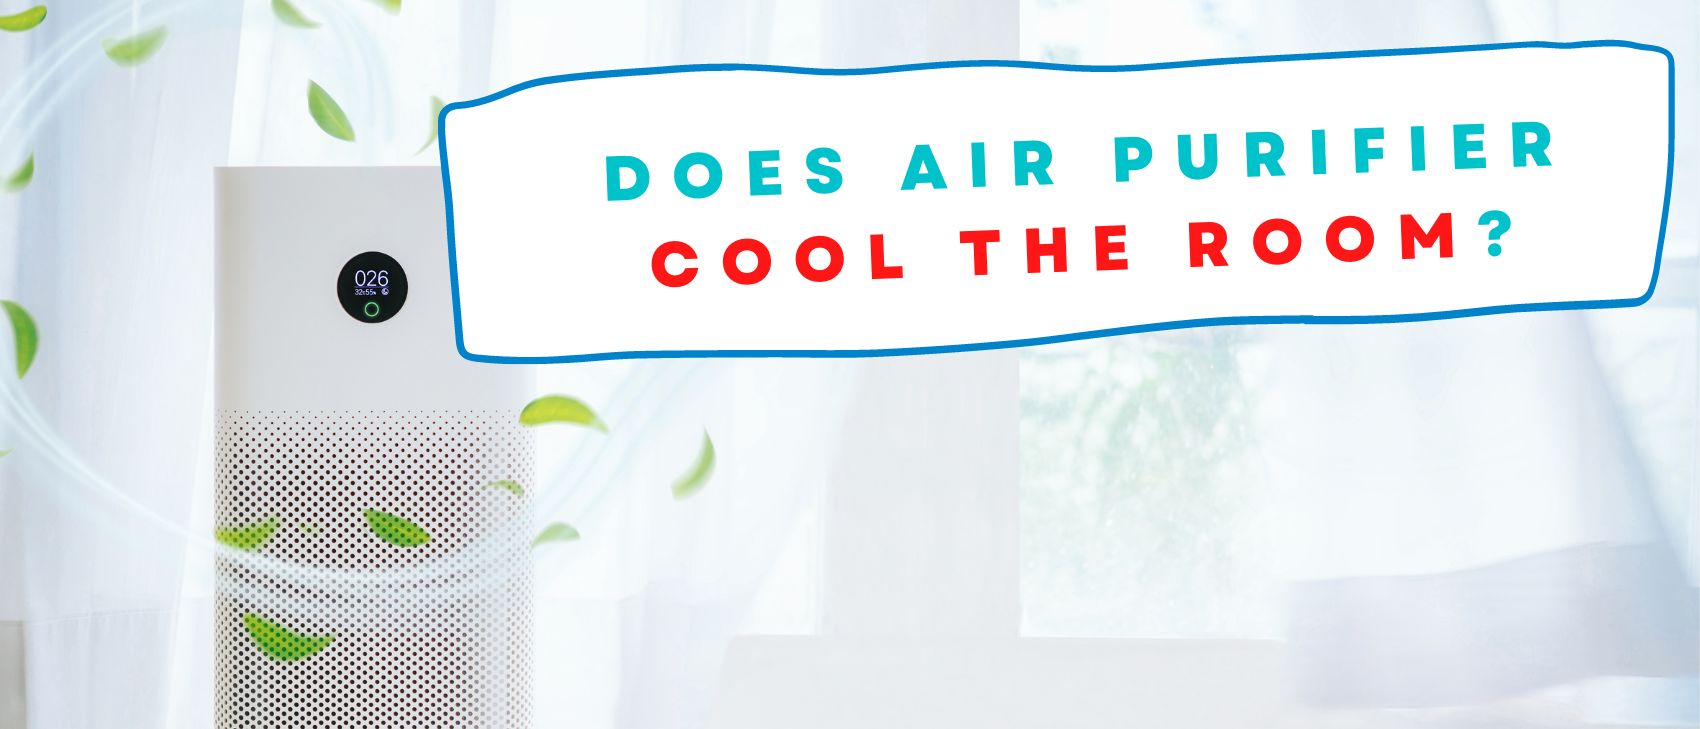 Does Air Purifier Cool The Room?